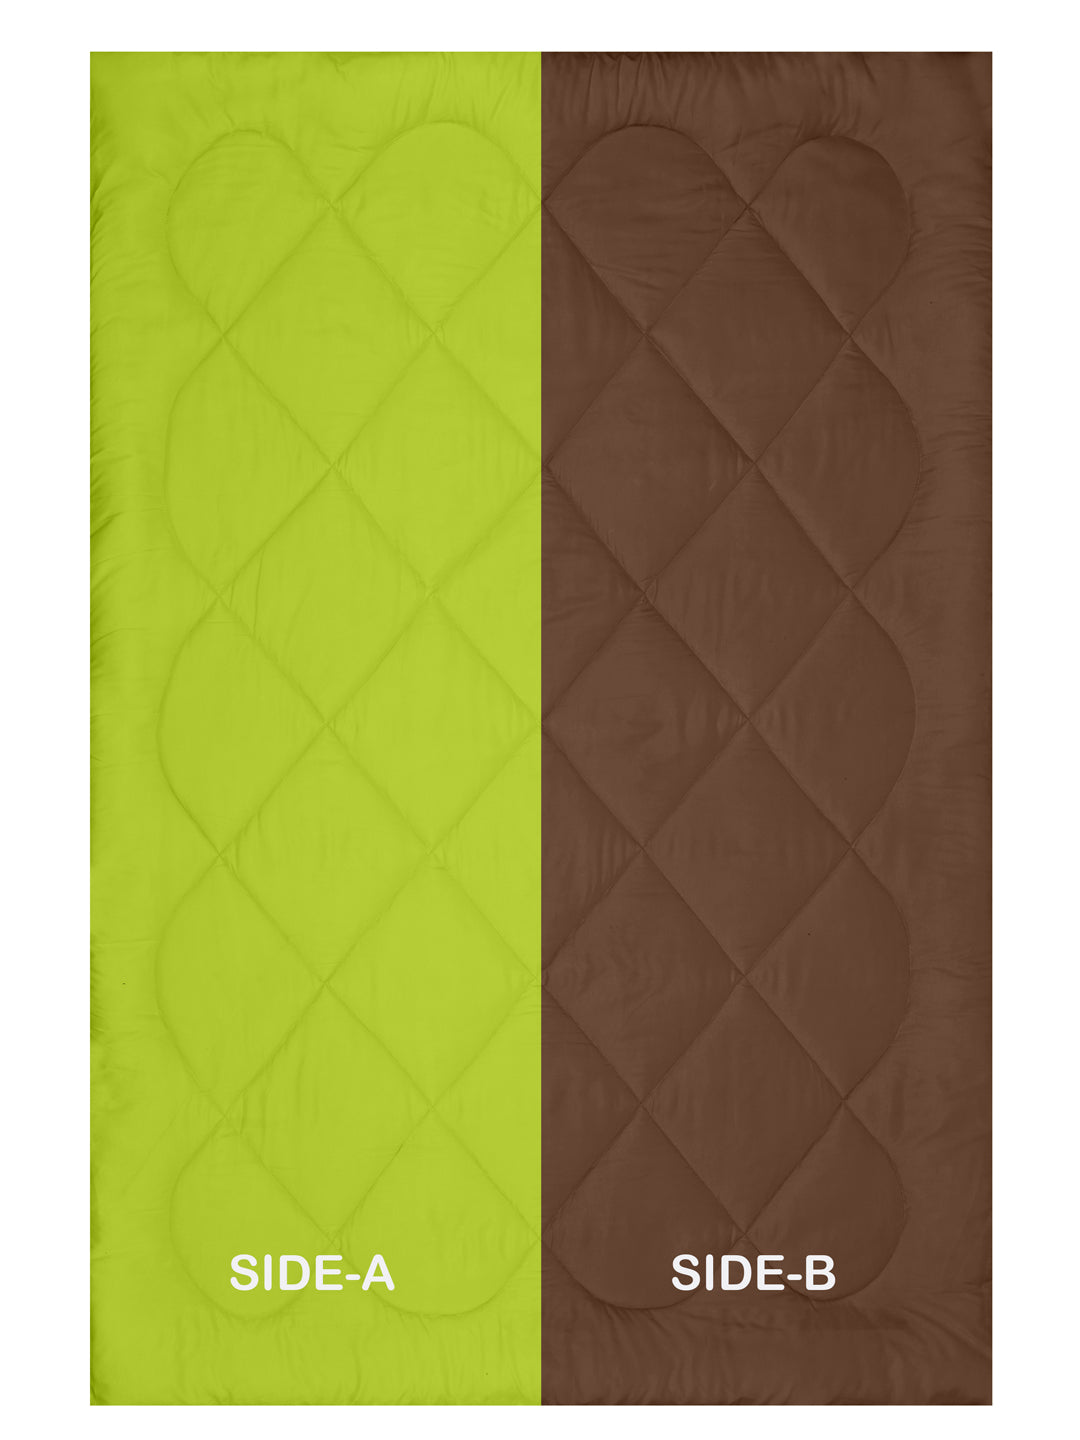 Reversible Single Bed Comforter 200 GSM 60x90 Inches (Green & Brown)